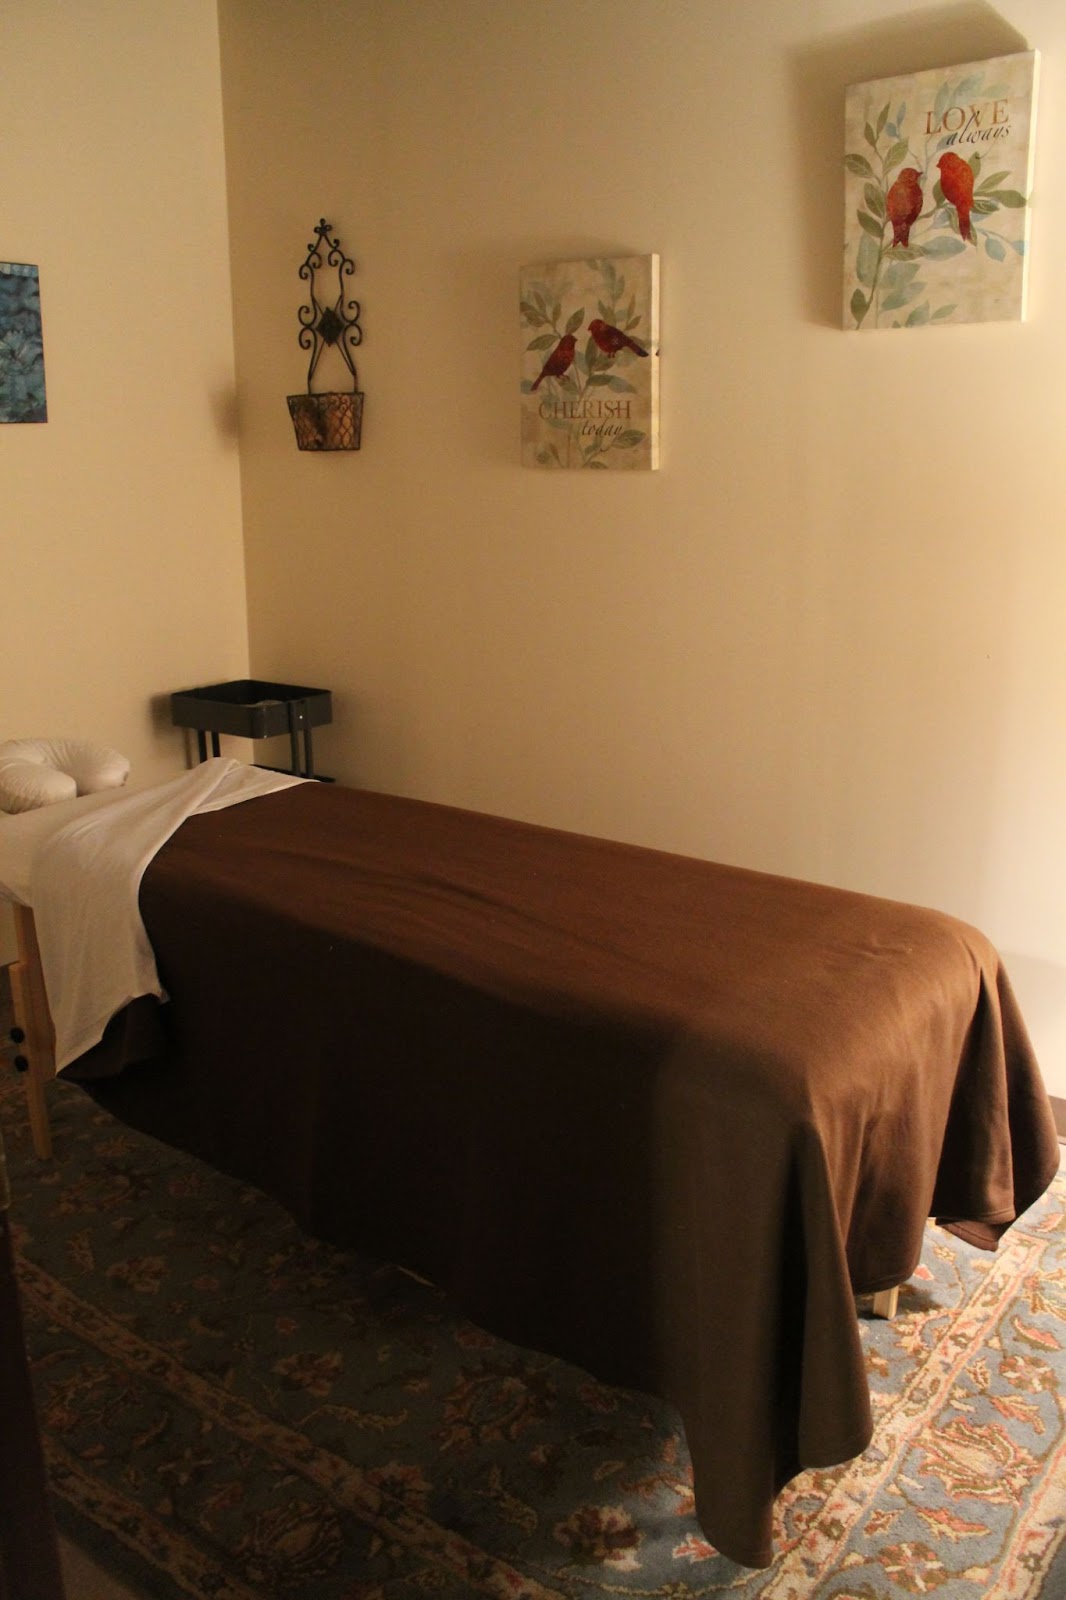 What amenities are important to you when finding a yoga studio? Massage therapy and reiki are often offered in some yoga studios